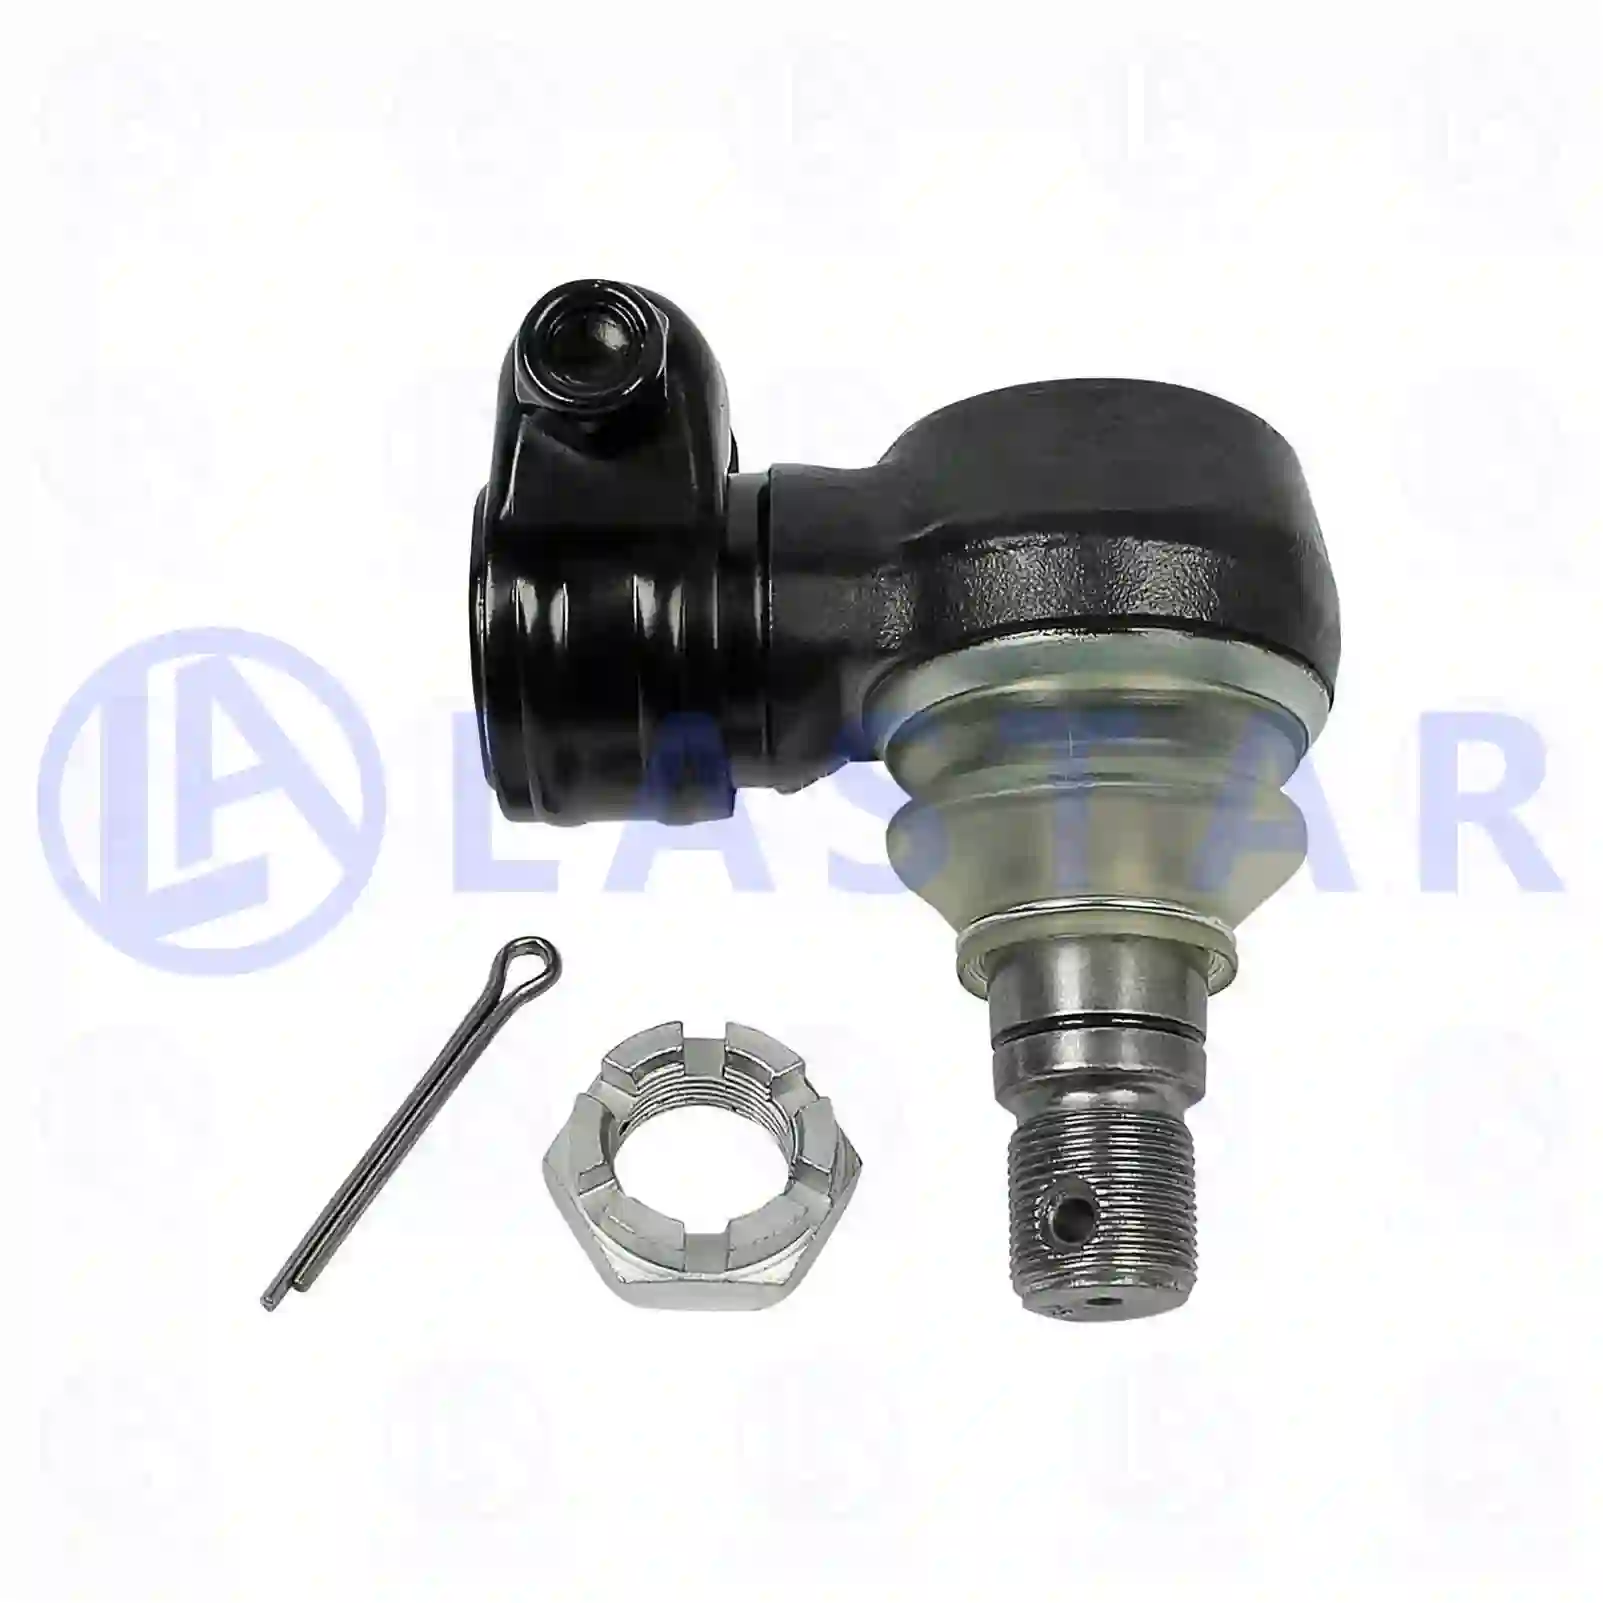 Track Rod Ball joint, right hand thread, la no: 77730382 ,  oem no:55175540, 93192809, 81953016238, 82953016015, 0024601448, 011019869, 012216380, 281953016238, 46181340, 55175540 Lastar Spare Part | Truck Spare Parts, Auotomotive Spare Parts